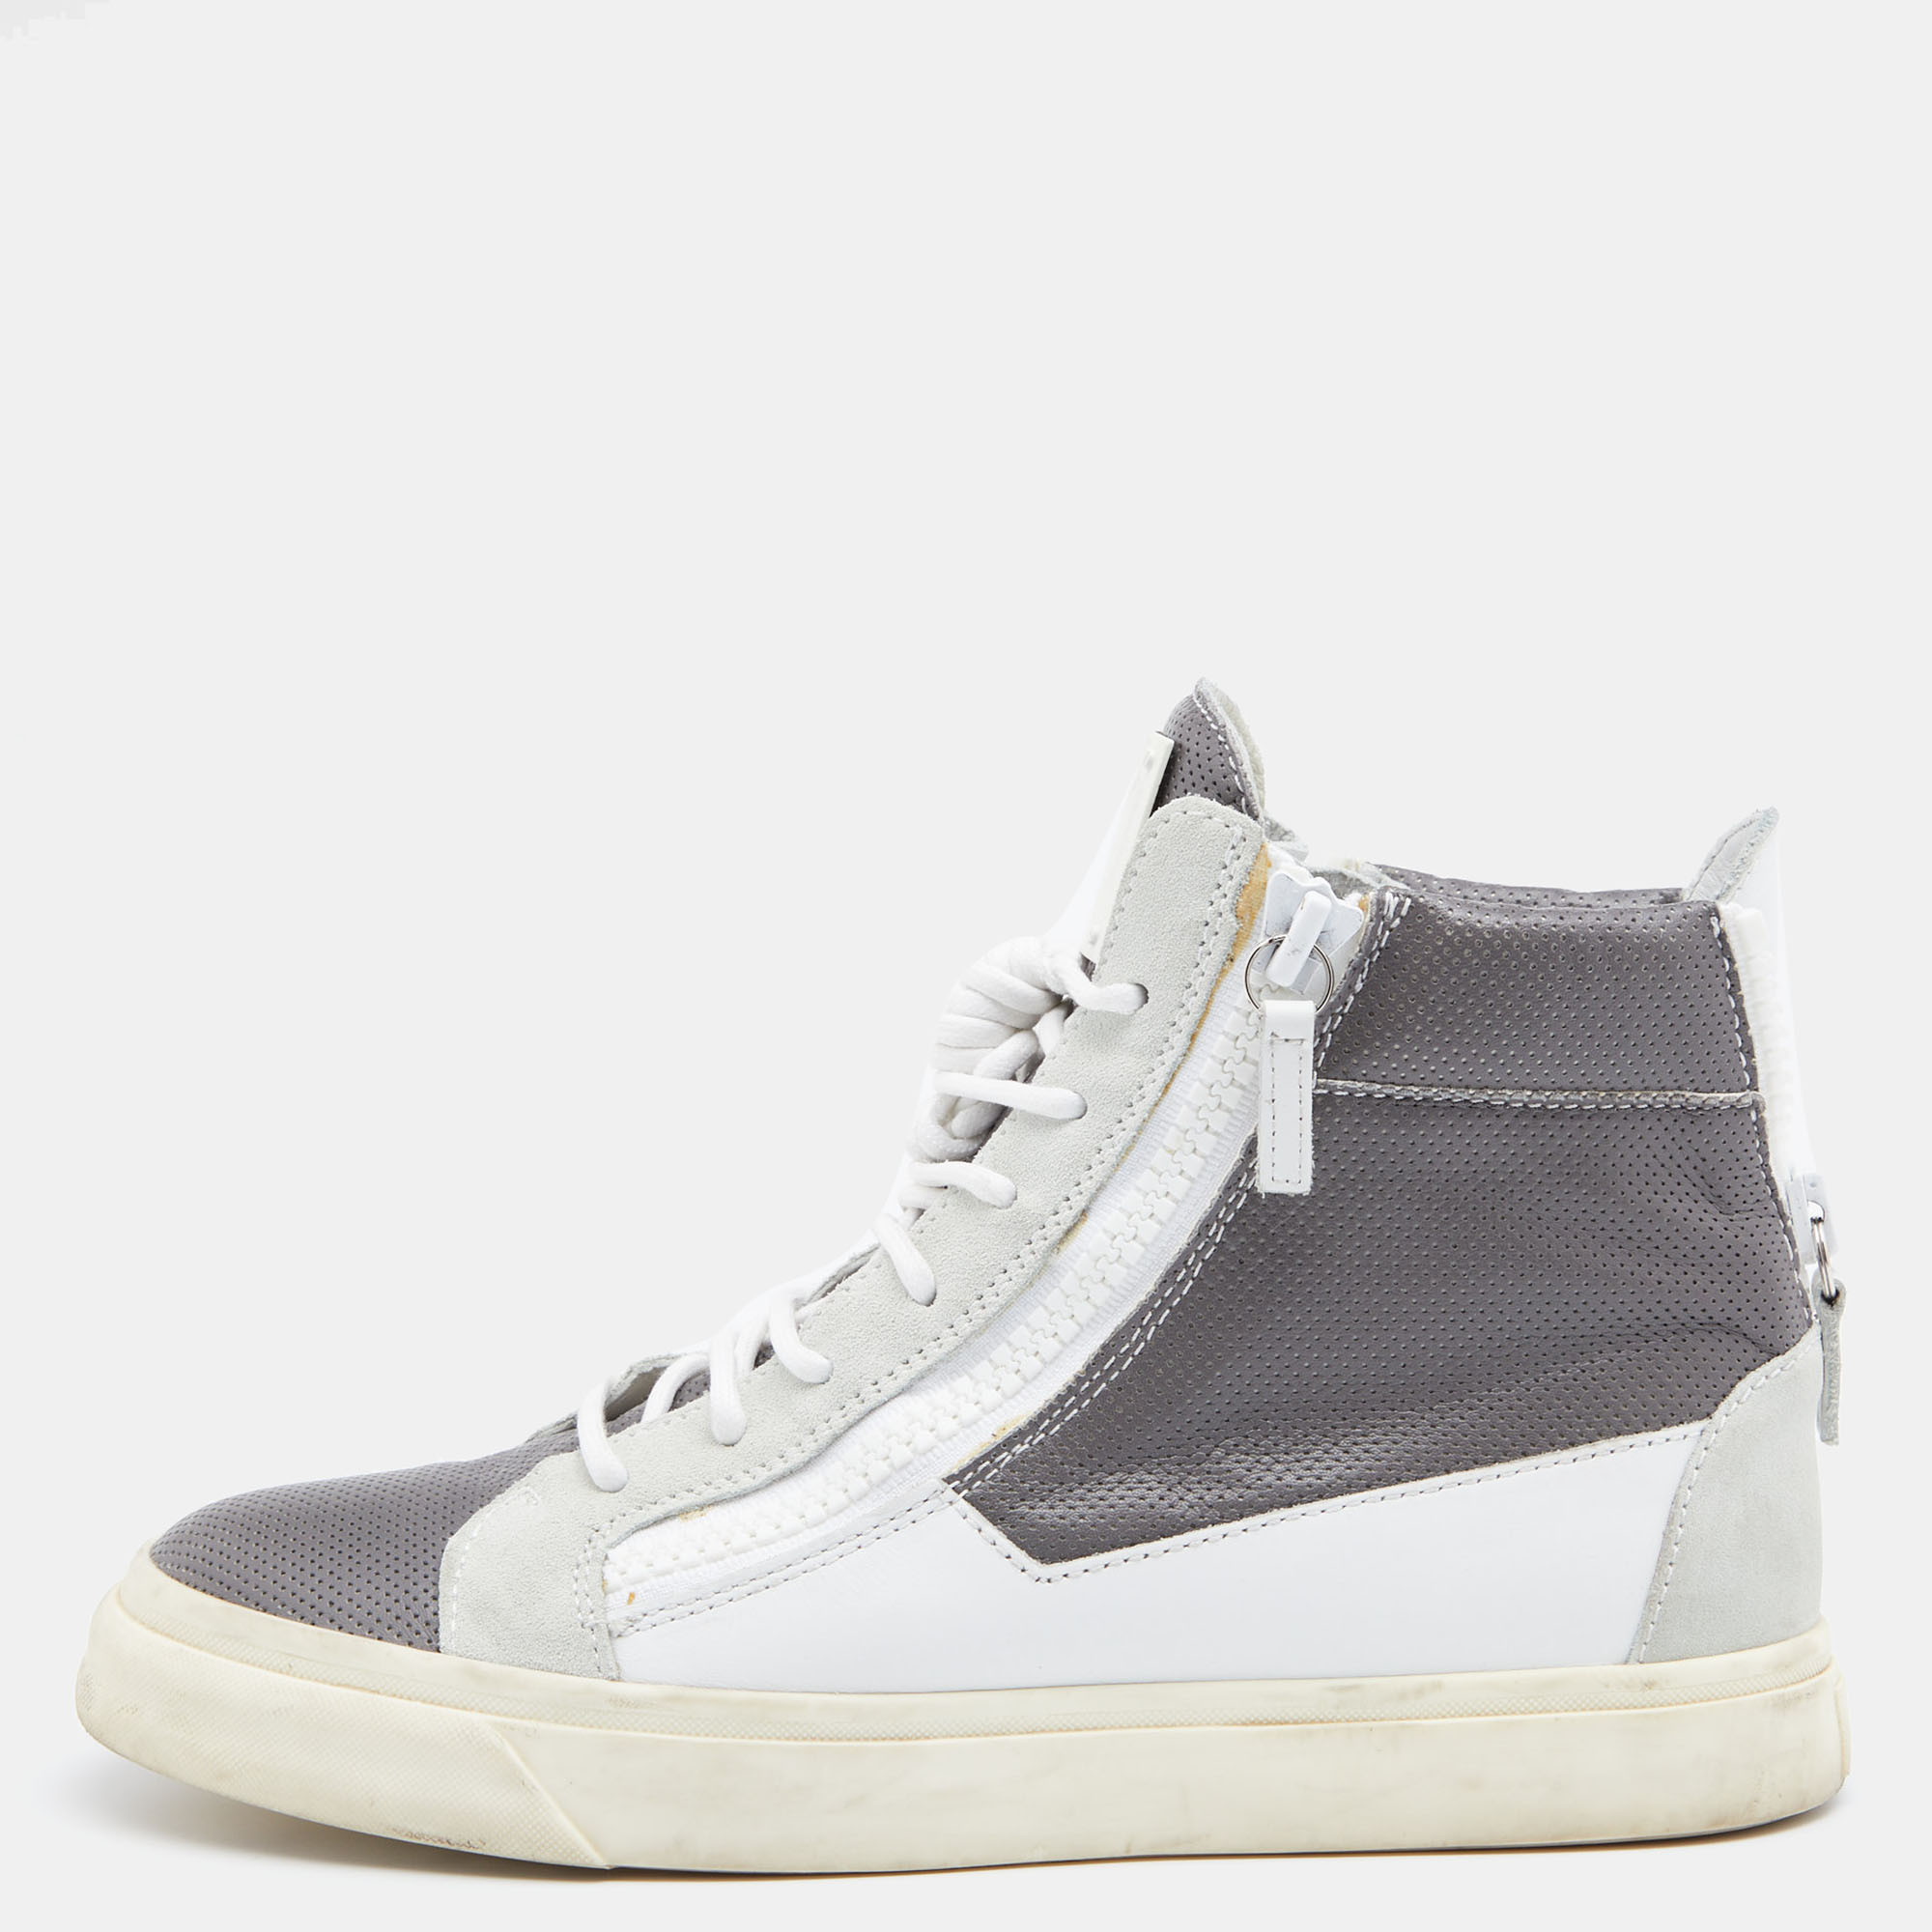 These sneakers from Giuseppe Zanotti bring you never ending trendiness and contemporary style They are made from grey white perforated leather and suede into a high top silhouette. They are adorned with lace up fastenings and zippers on their vamps. Sport a trendy style with these sneakers